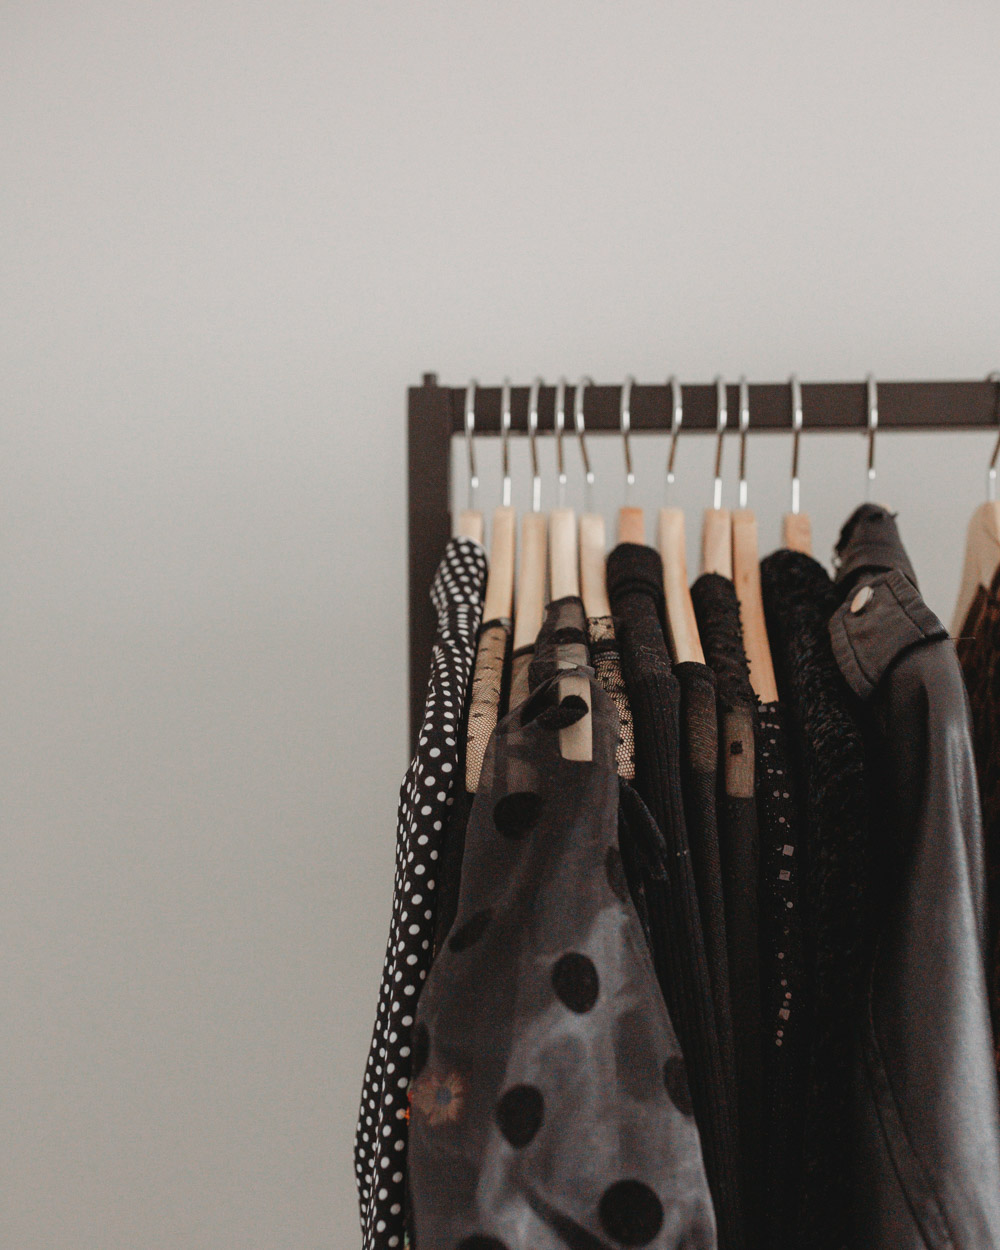 A close up view of a modern clothing rack with dark clothing on wooden hangers.